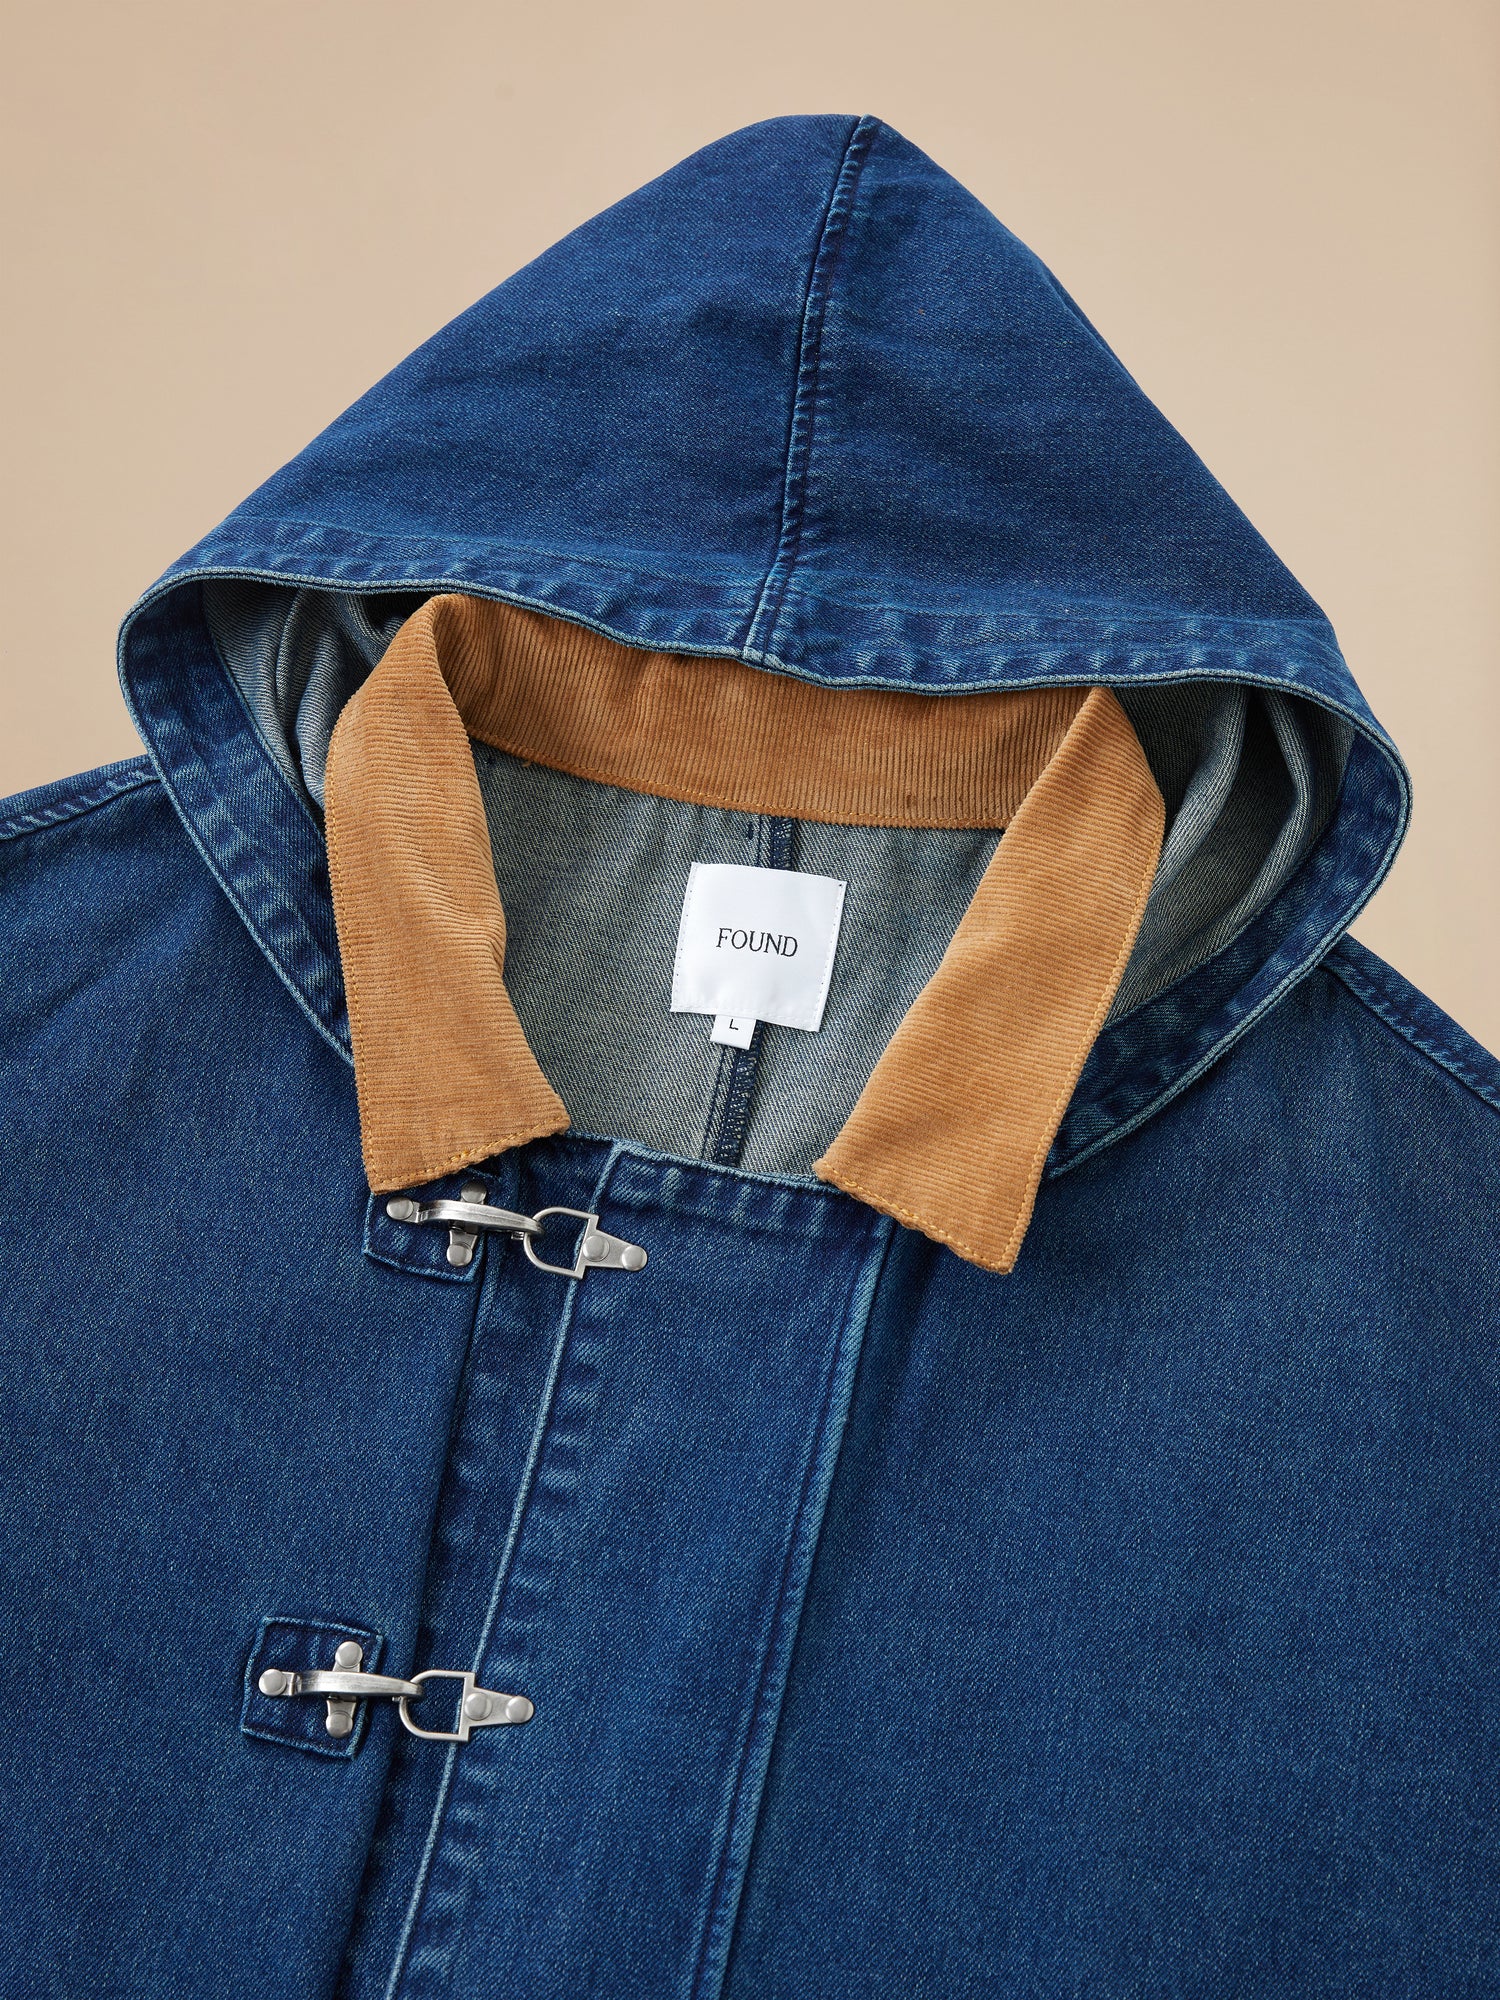 A Sargasso Denim Buckle Coat by Found with a hood.